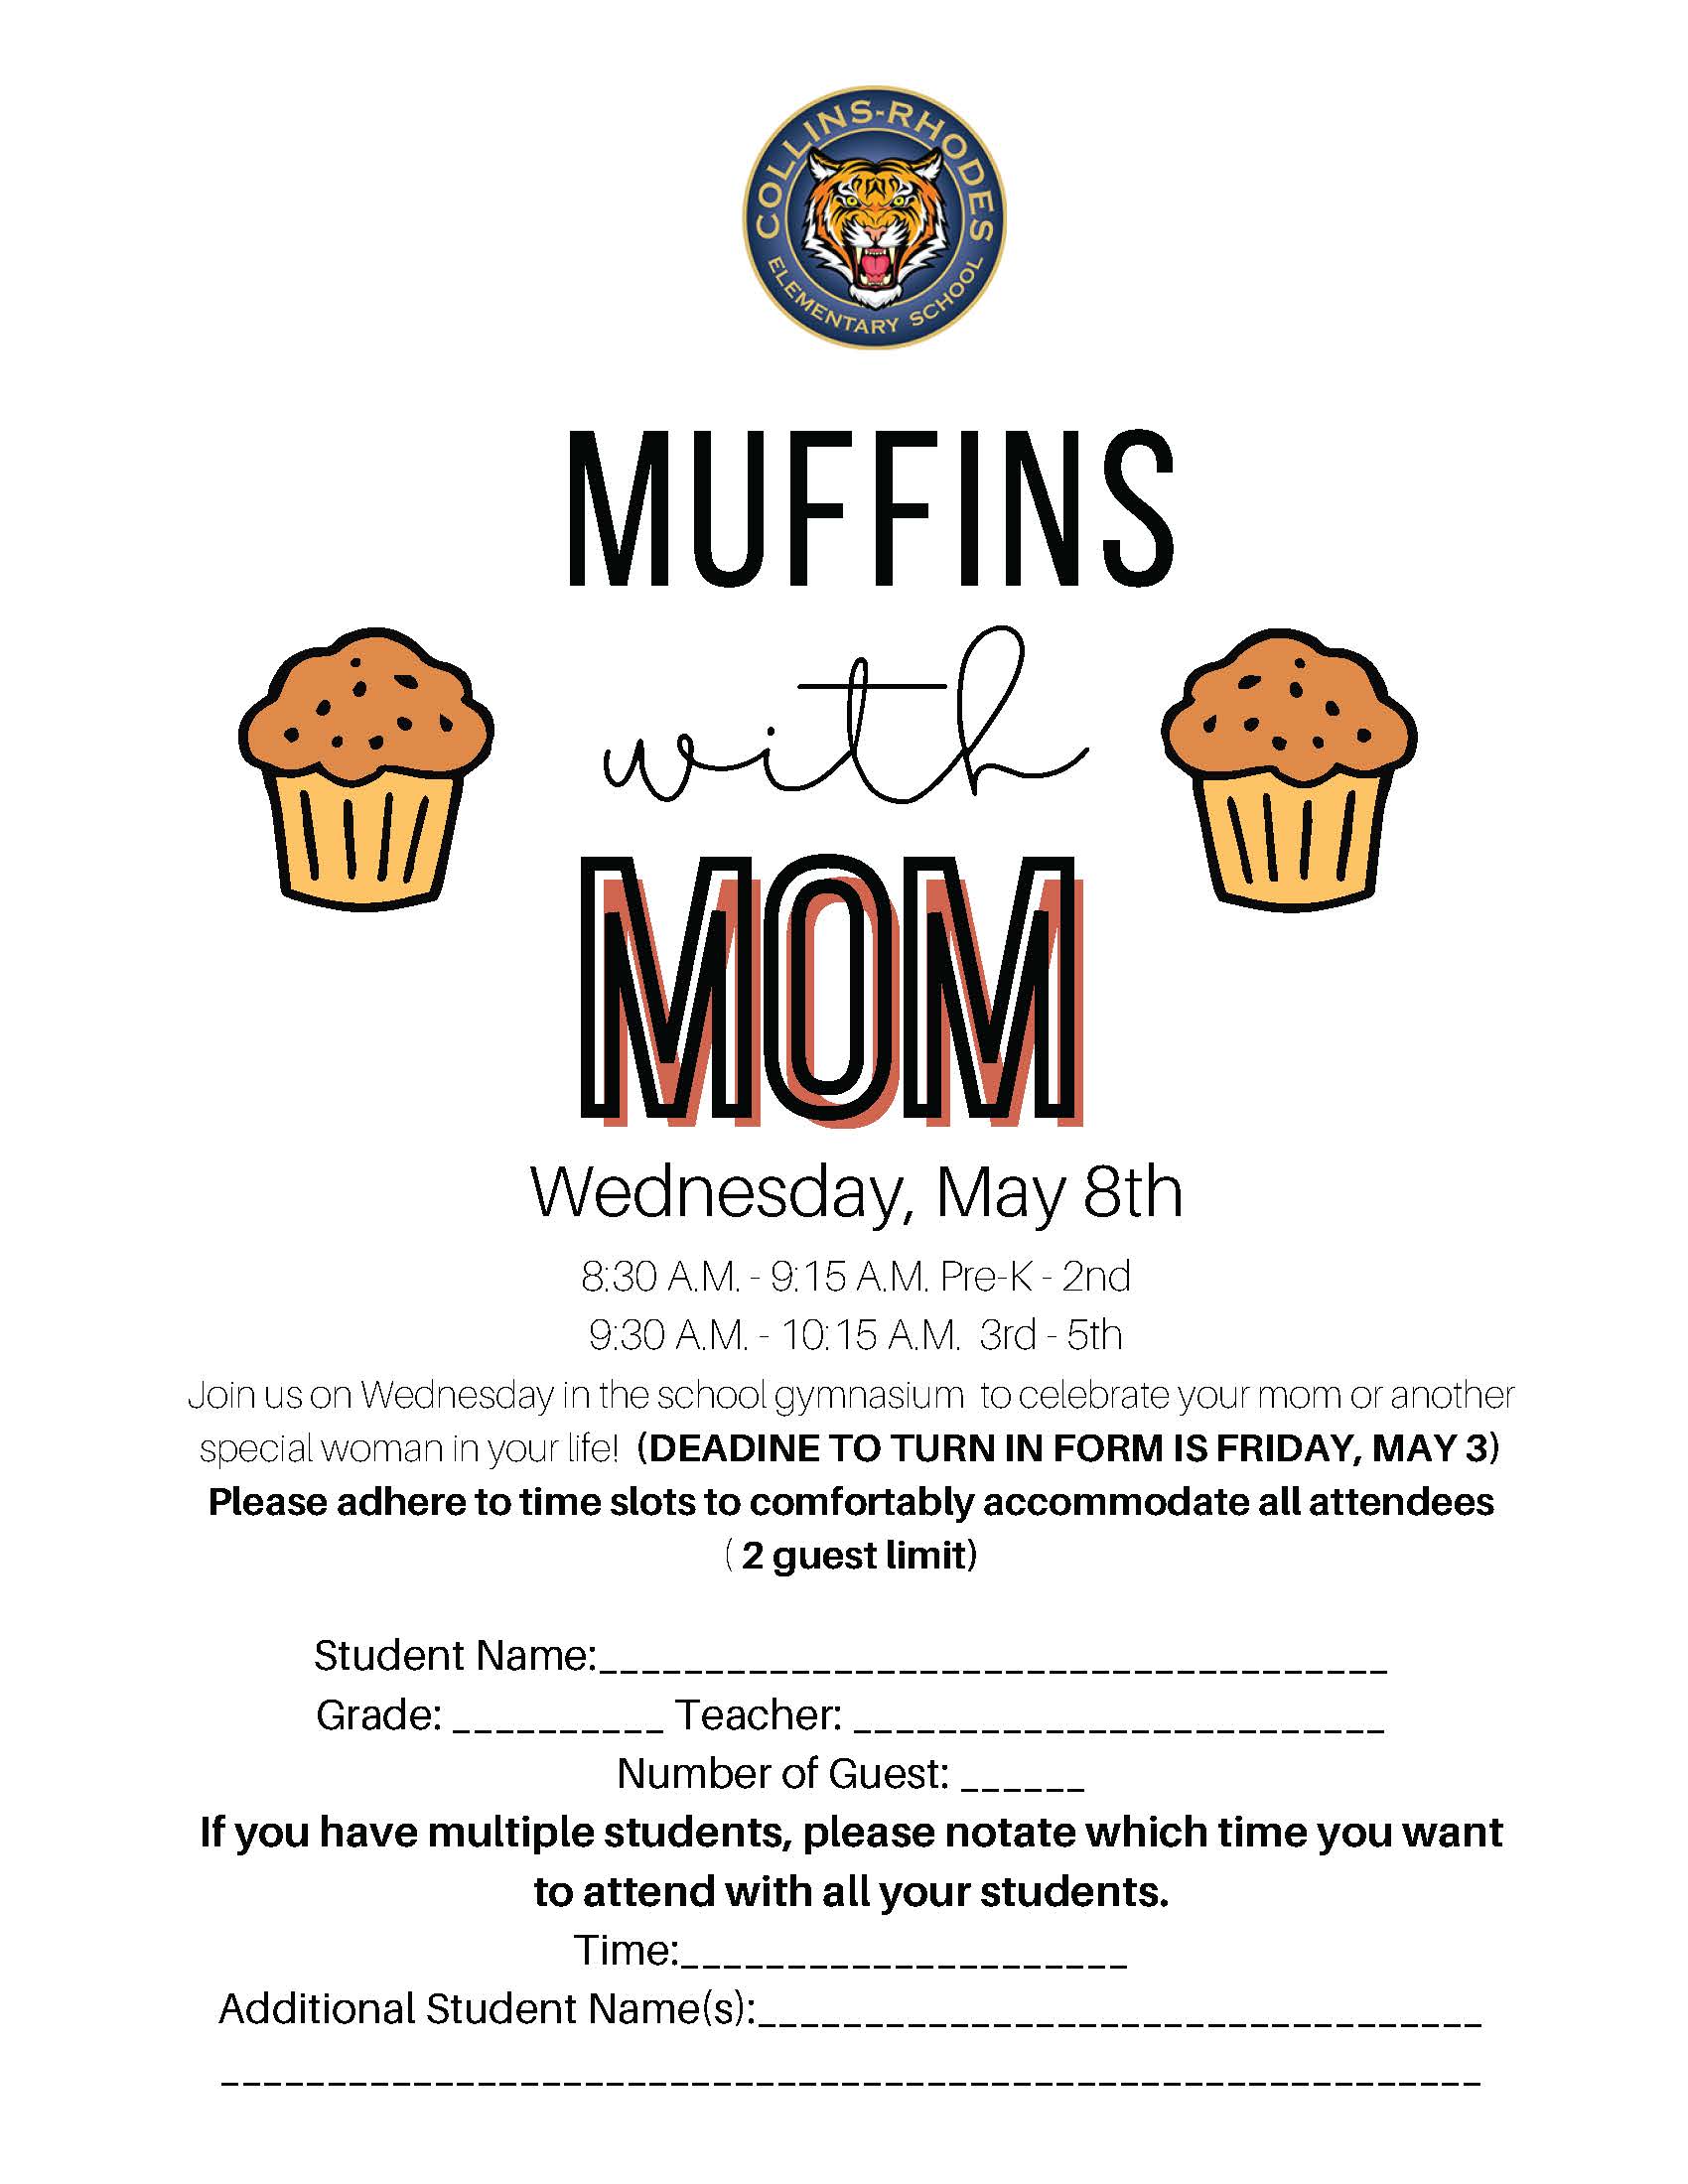 Muffins for Mom Flyer